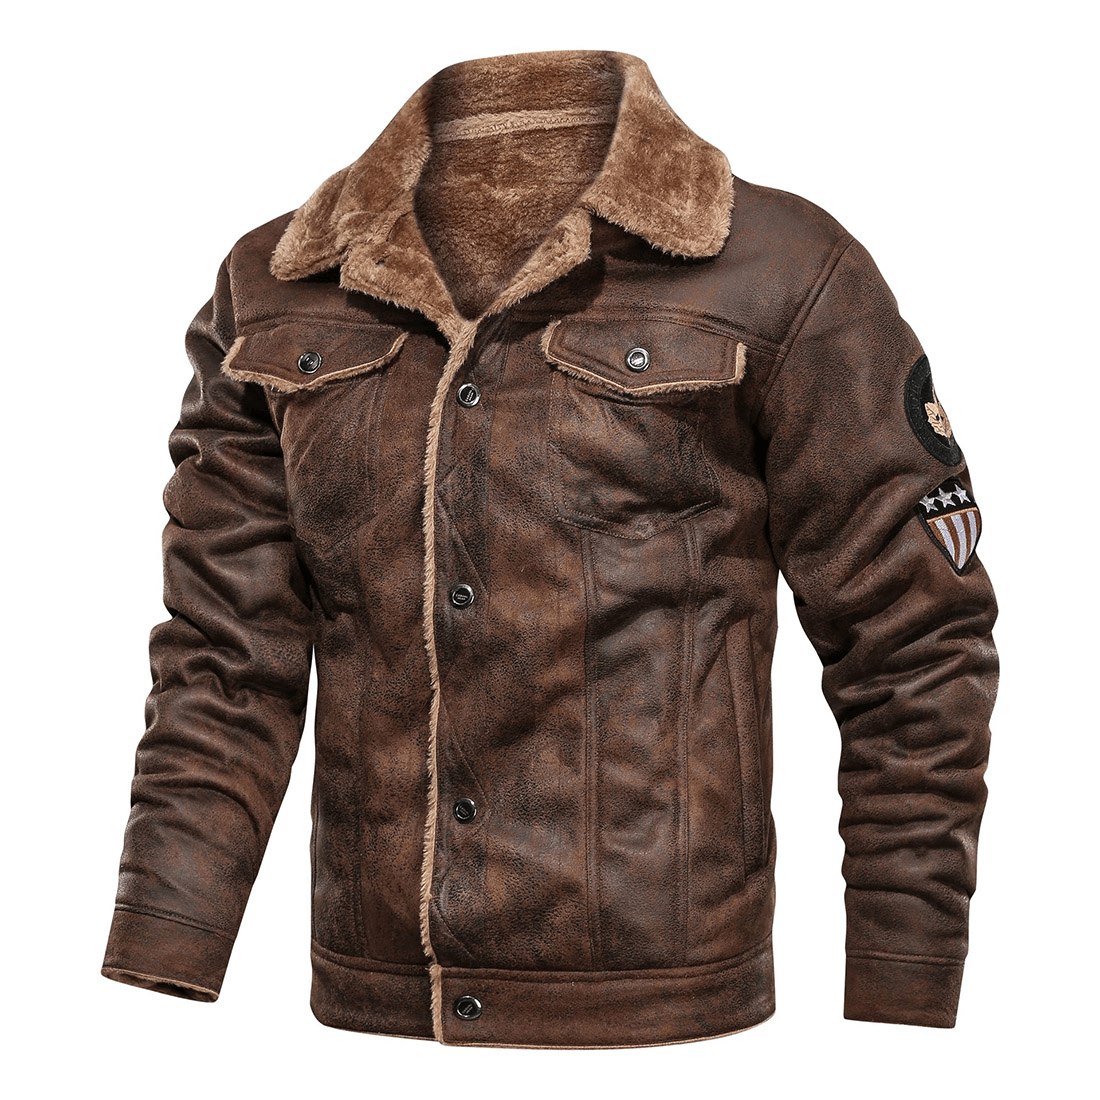 Motorcycle Cashmere Jacket Without a Hood / Casual Buttons Pockets Warm Jackets